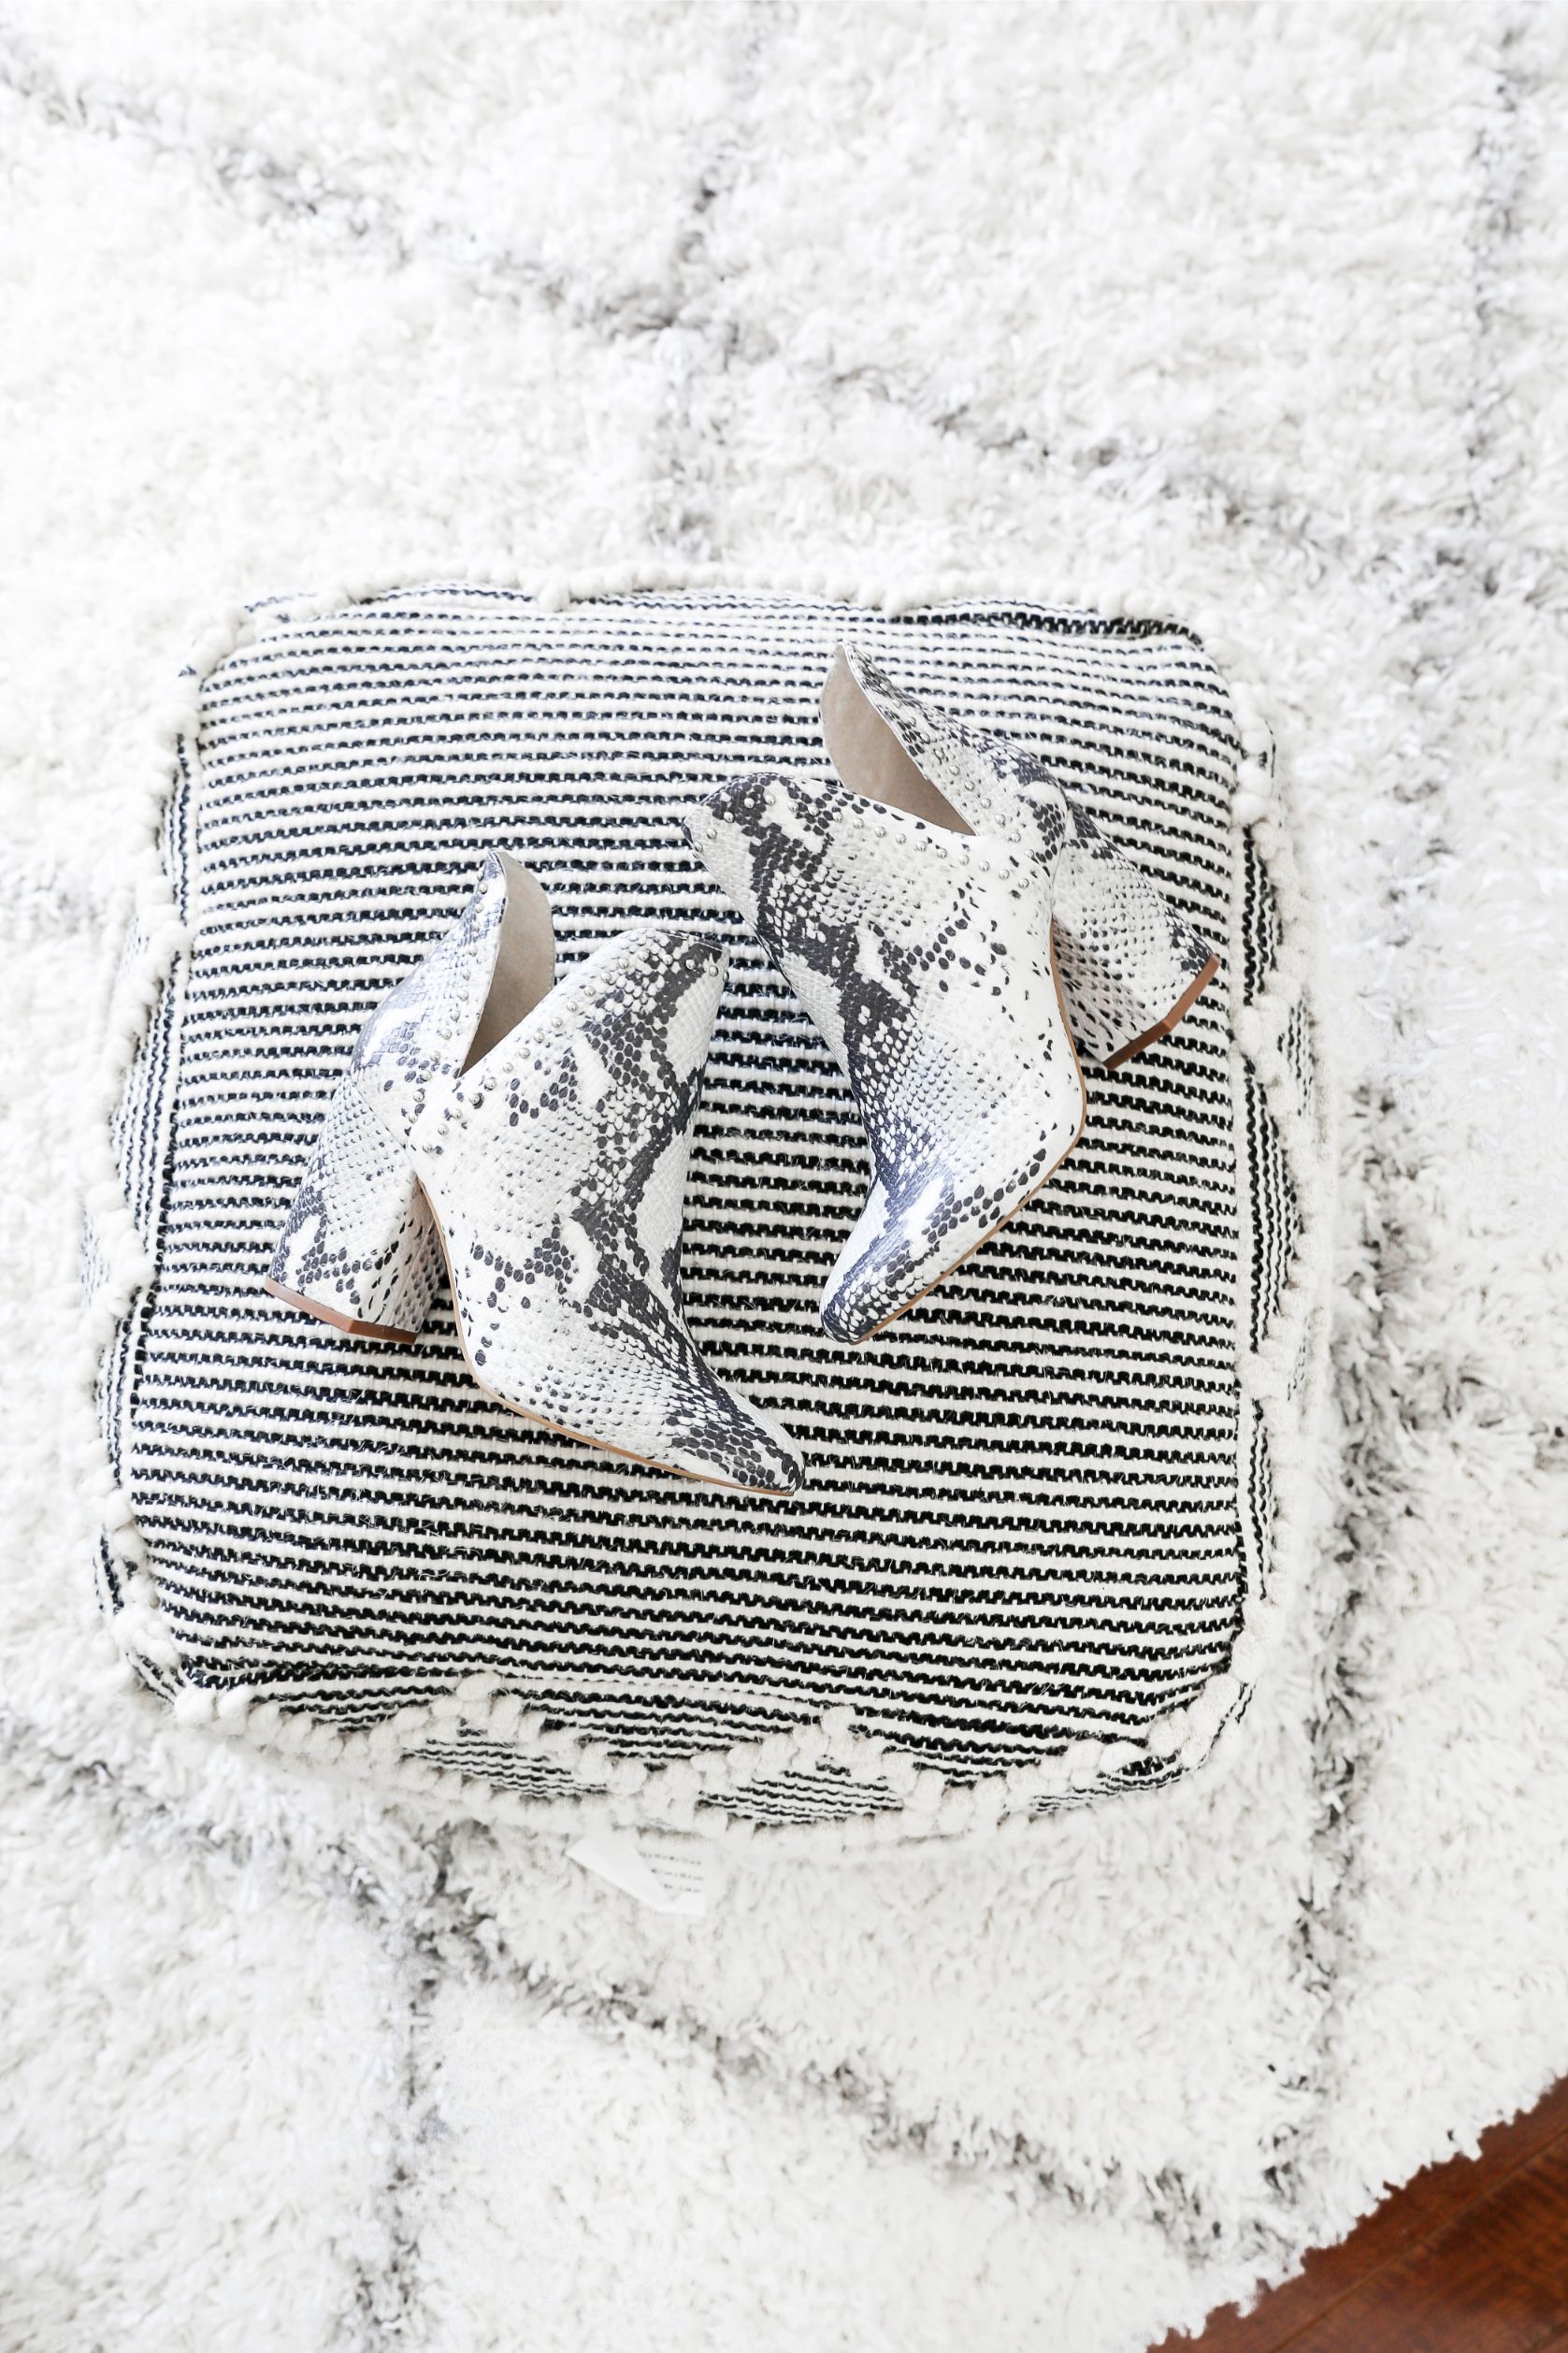 Nordstrom Anniversary Sale 2019! All the best shoes and accessories in one roundup! I am also sharing some cute scarves and hats! Which are your favorite? I love the booties this year! Details on daily dose of charm by lauren lindmark